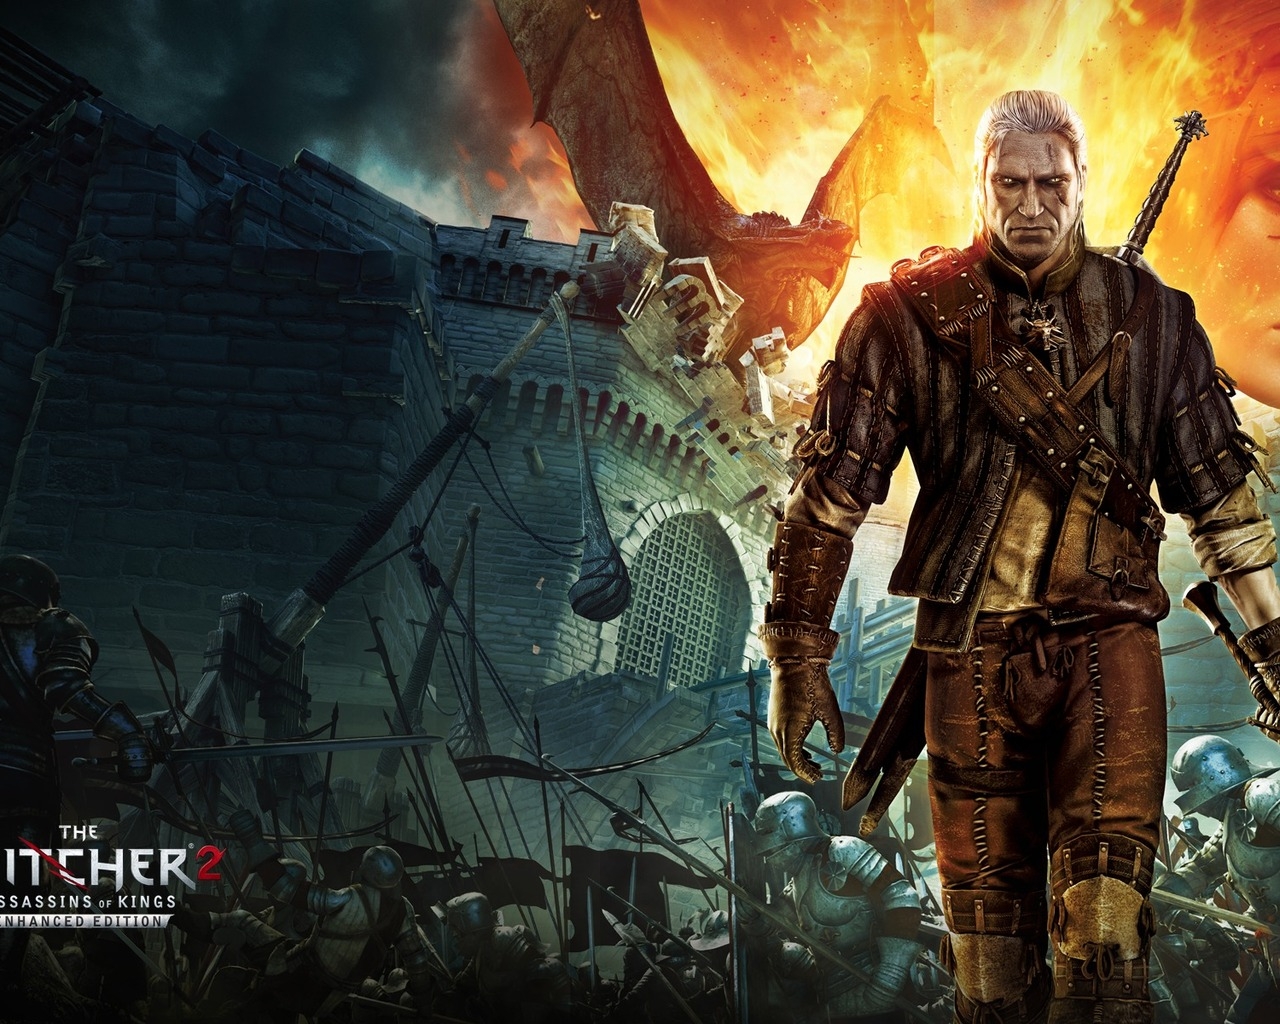 The Witcher 2 Assassins of Kings PC Game for 1280 x 1024 resolution